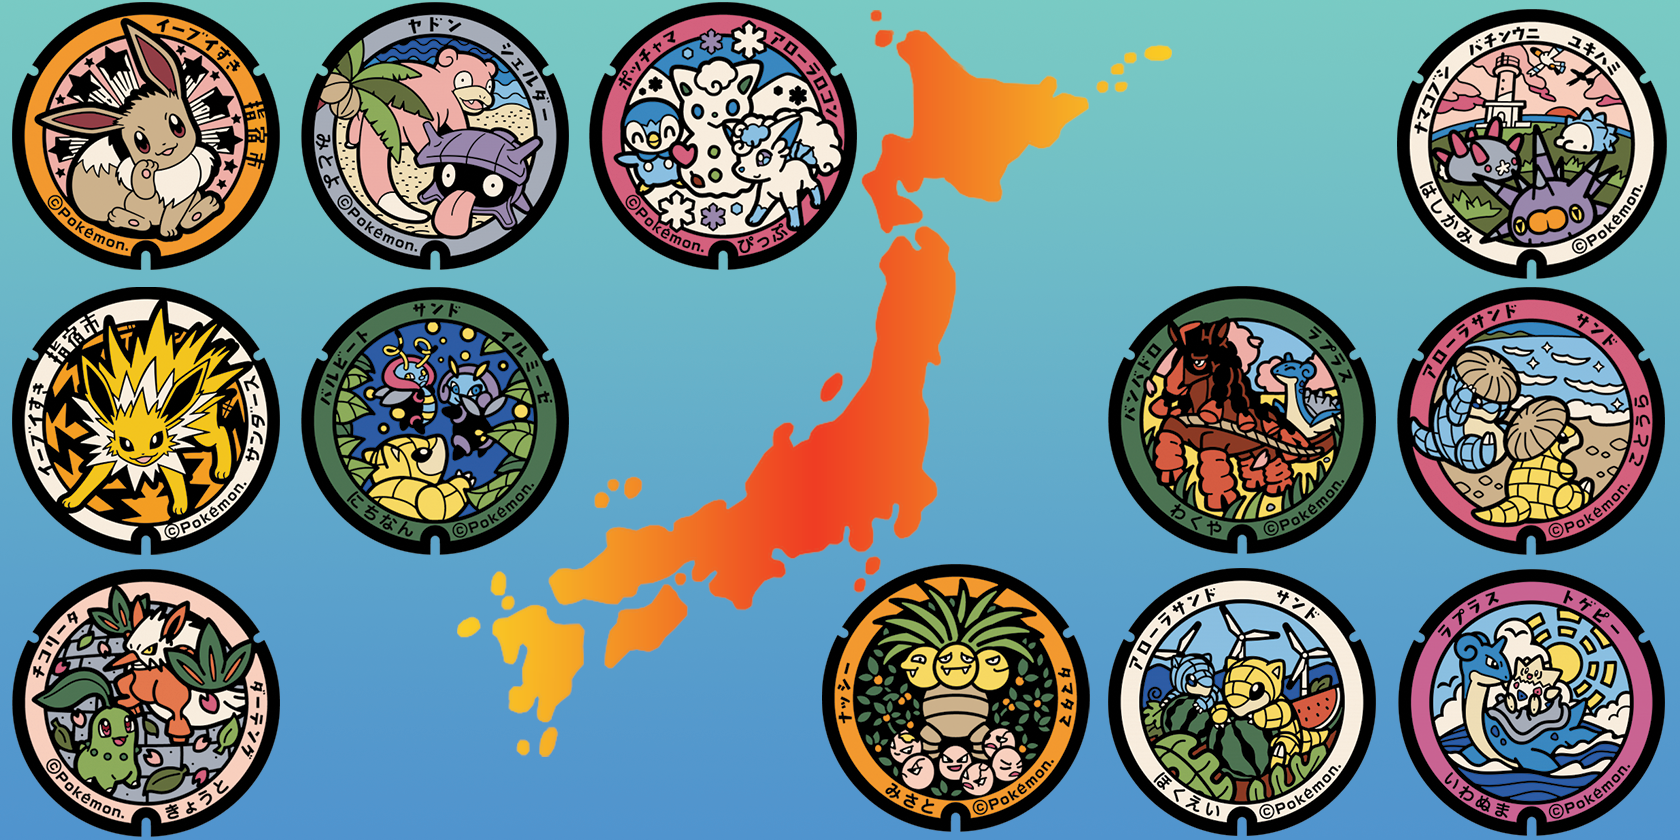 Check Out These Awesome Japanese Pokemon Manhole Covers